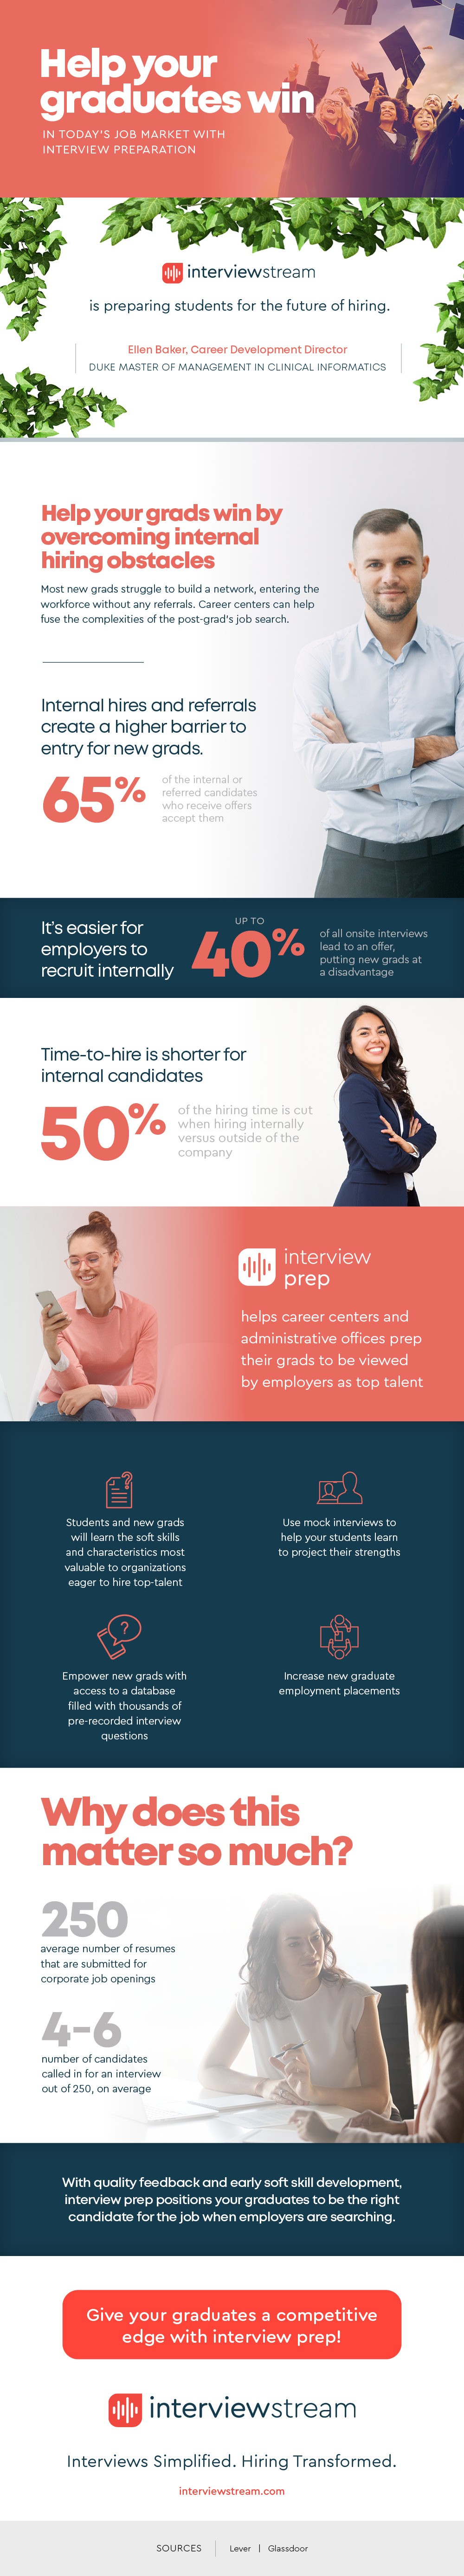 Infographic showcasing the importance of preparing college graduates to compete with internal job applicants and referrals.